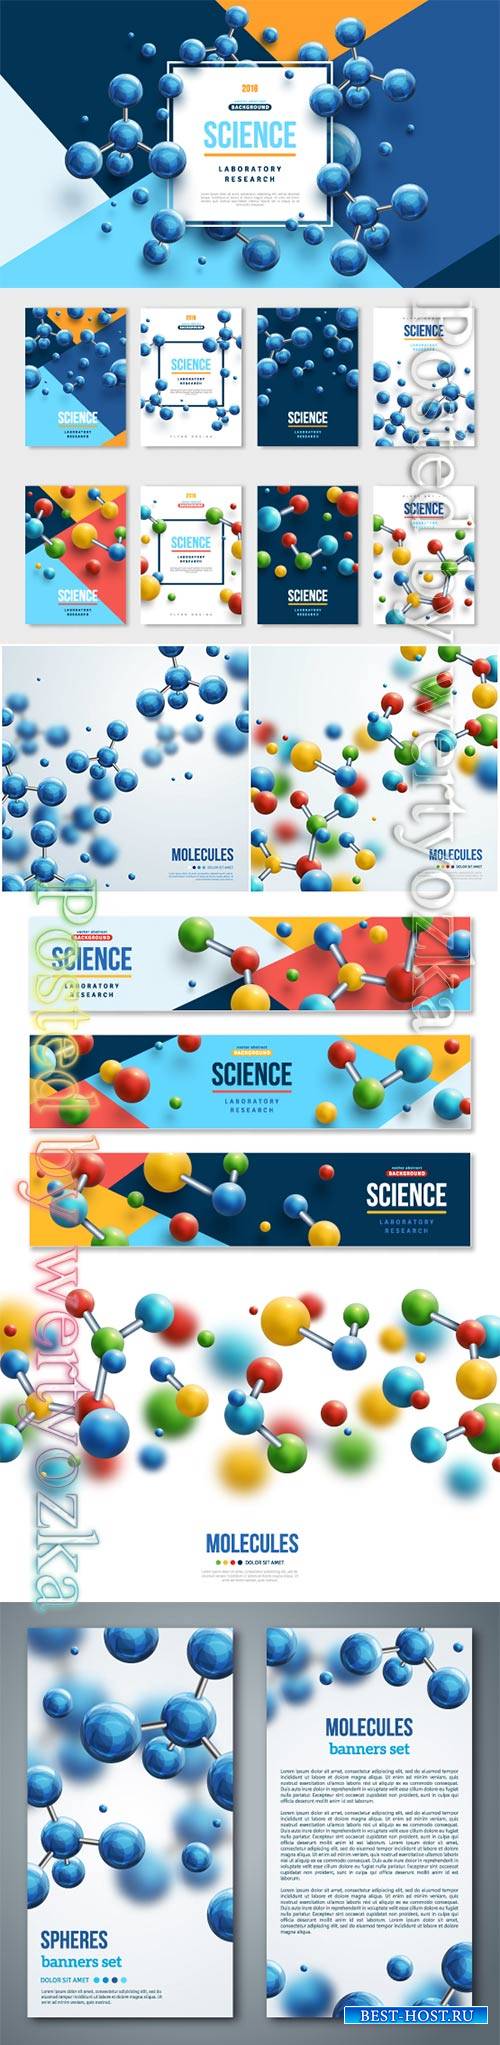 Science banner with vector molecules